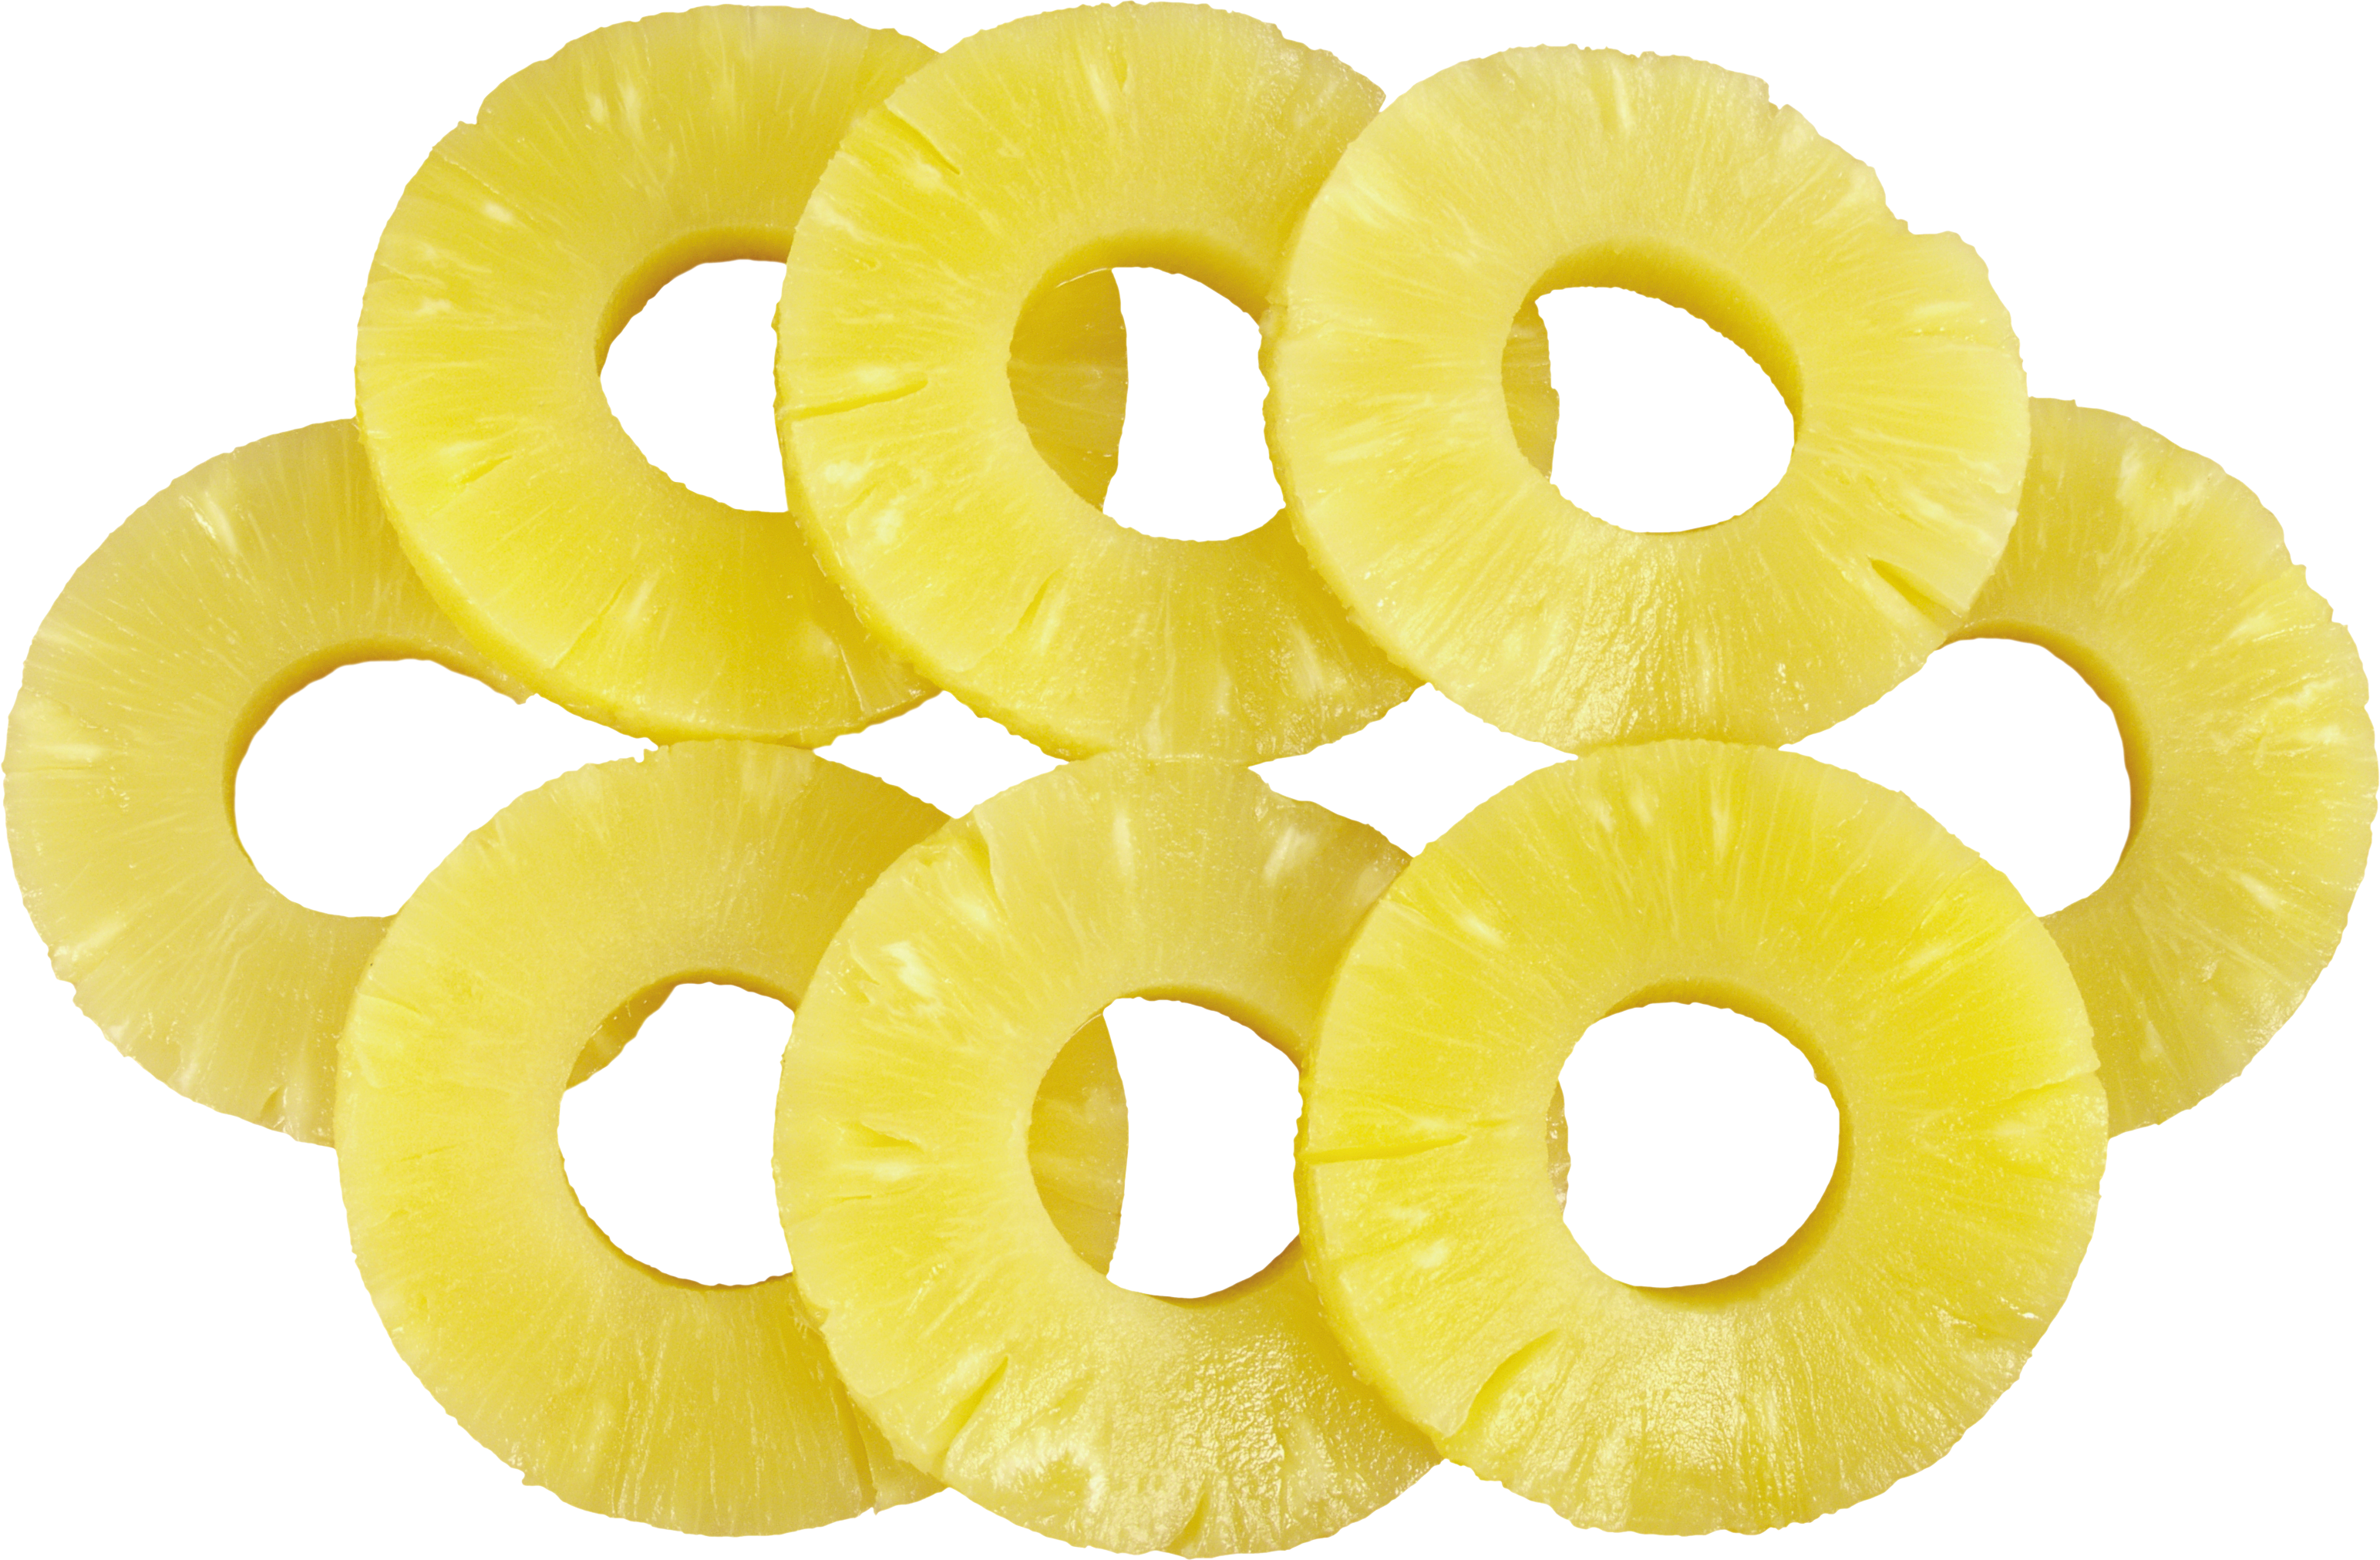 Pinapple Slices PNG Image